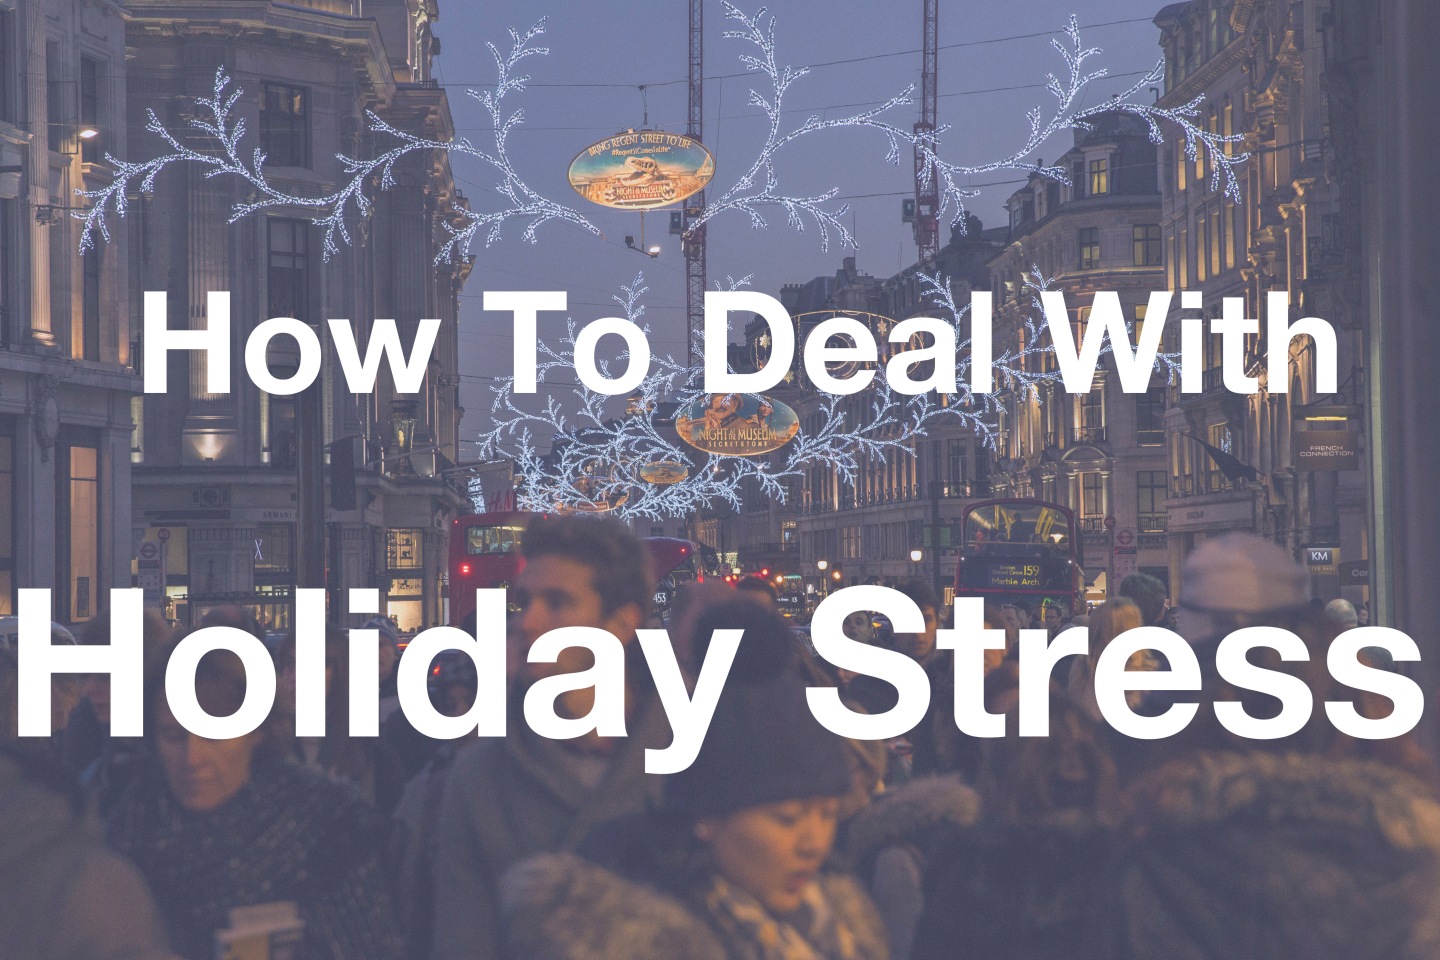 How To Deal With Holiday Stress